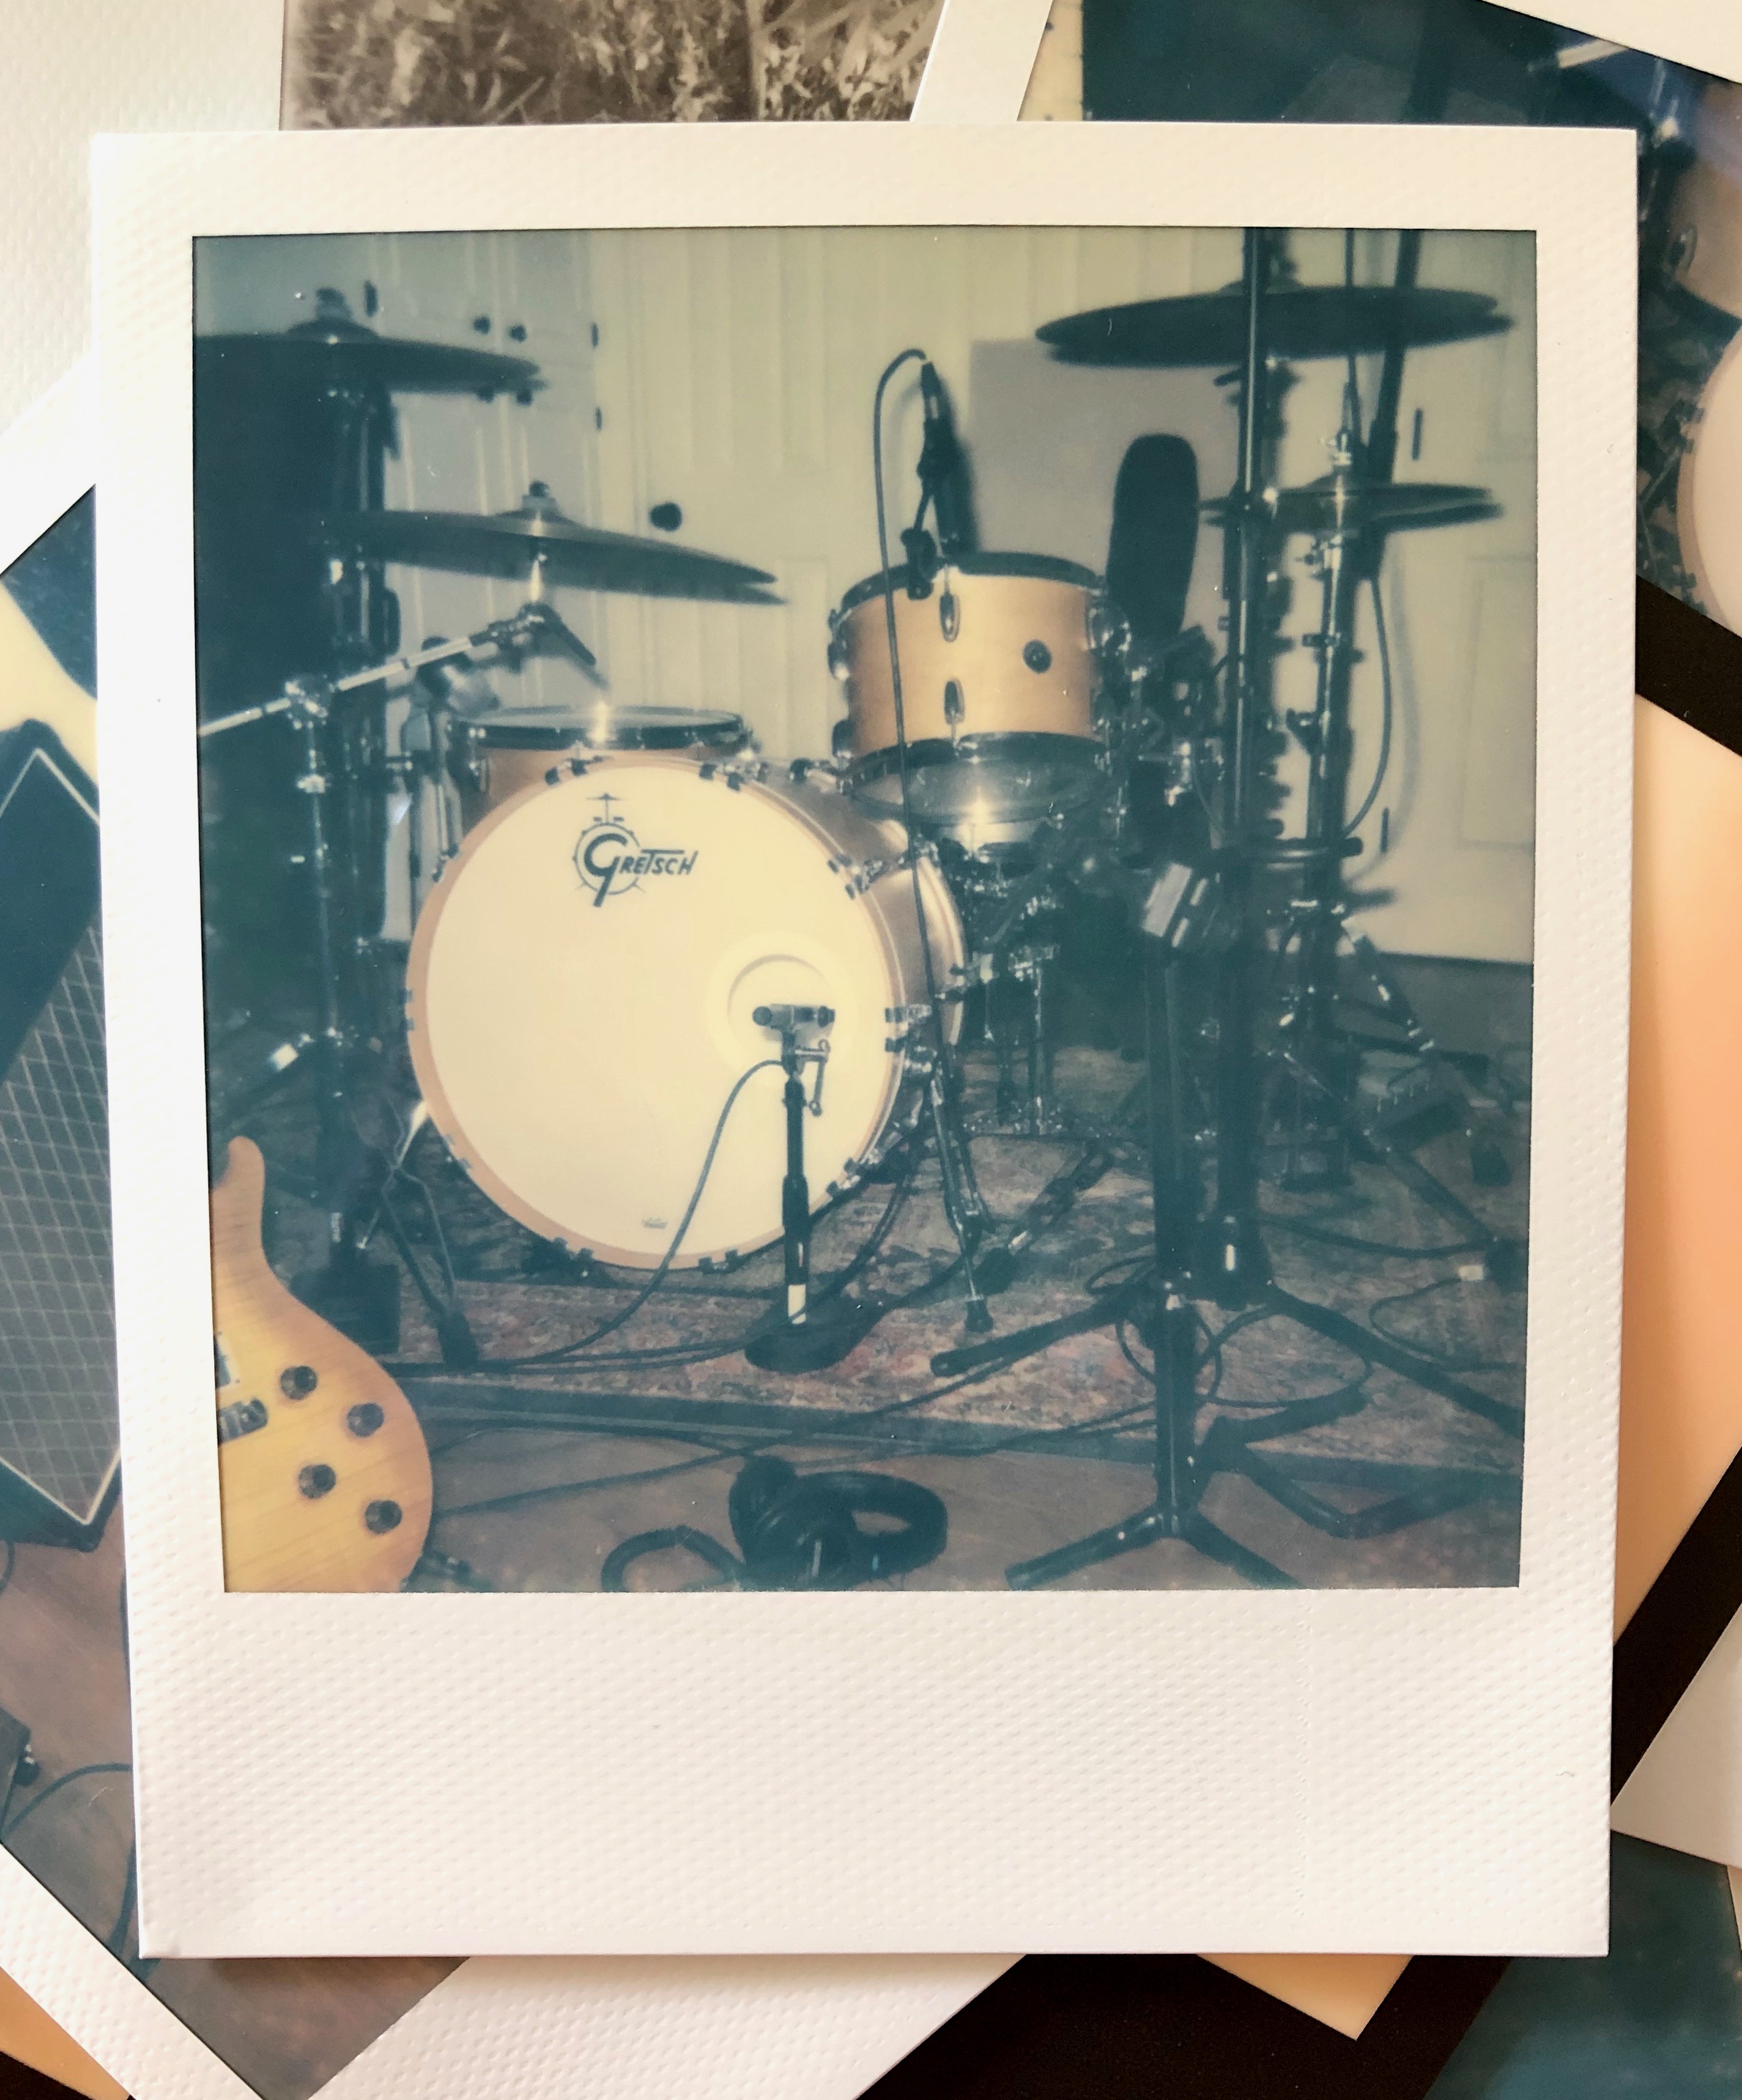 Polaroid picture of drums